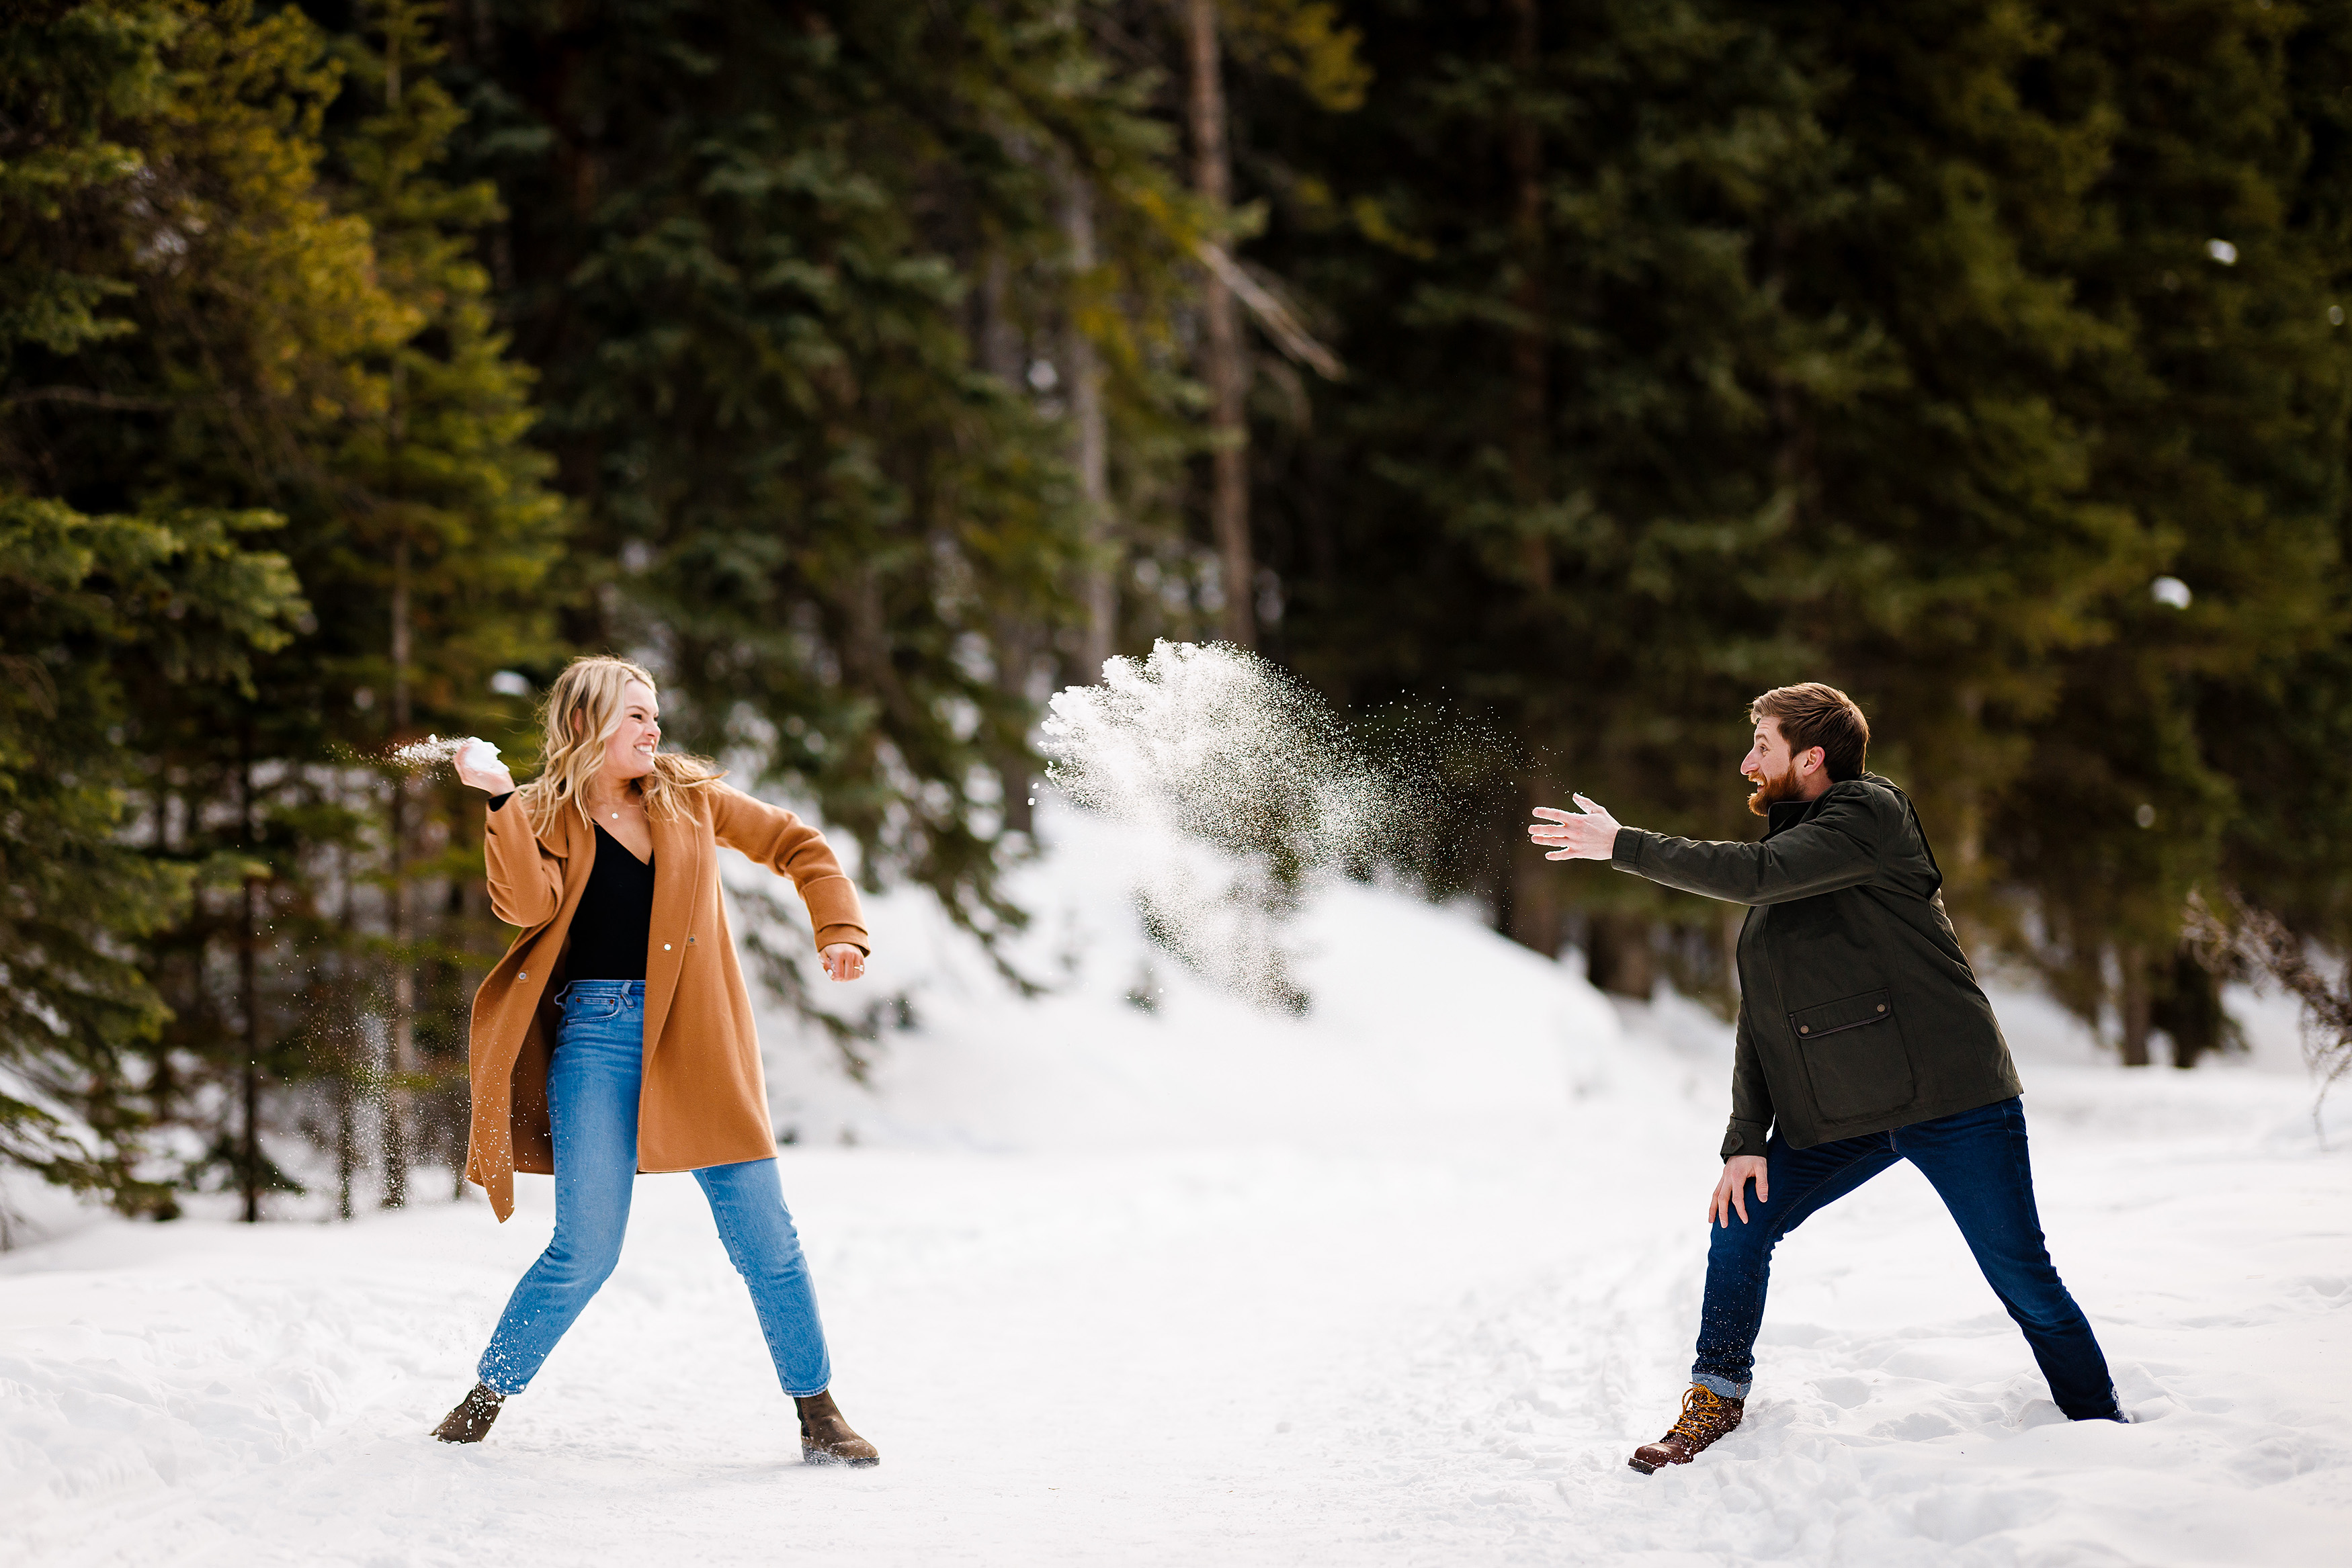 Zac & Audrey have a snowball fight with each other during their Breckenridge engagement photo session. 